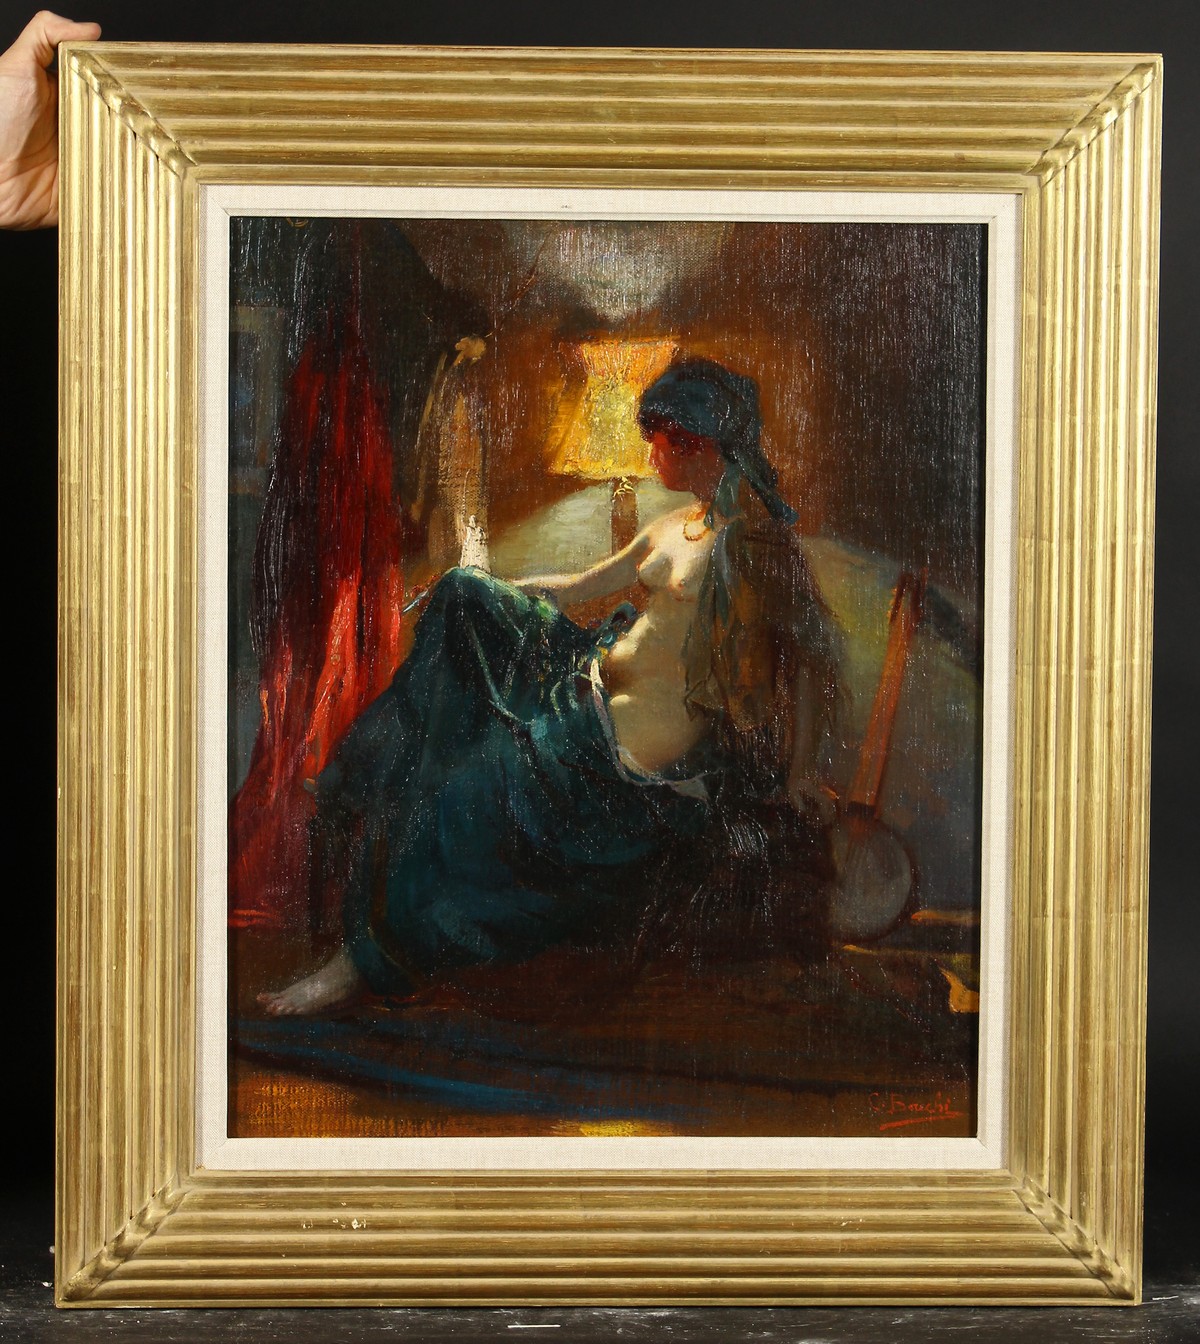 C. Bouchi (20th century) a study of a scantily clad gypsy woman, oil on canvas, signed, 21.5" x - Image 2 of 4